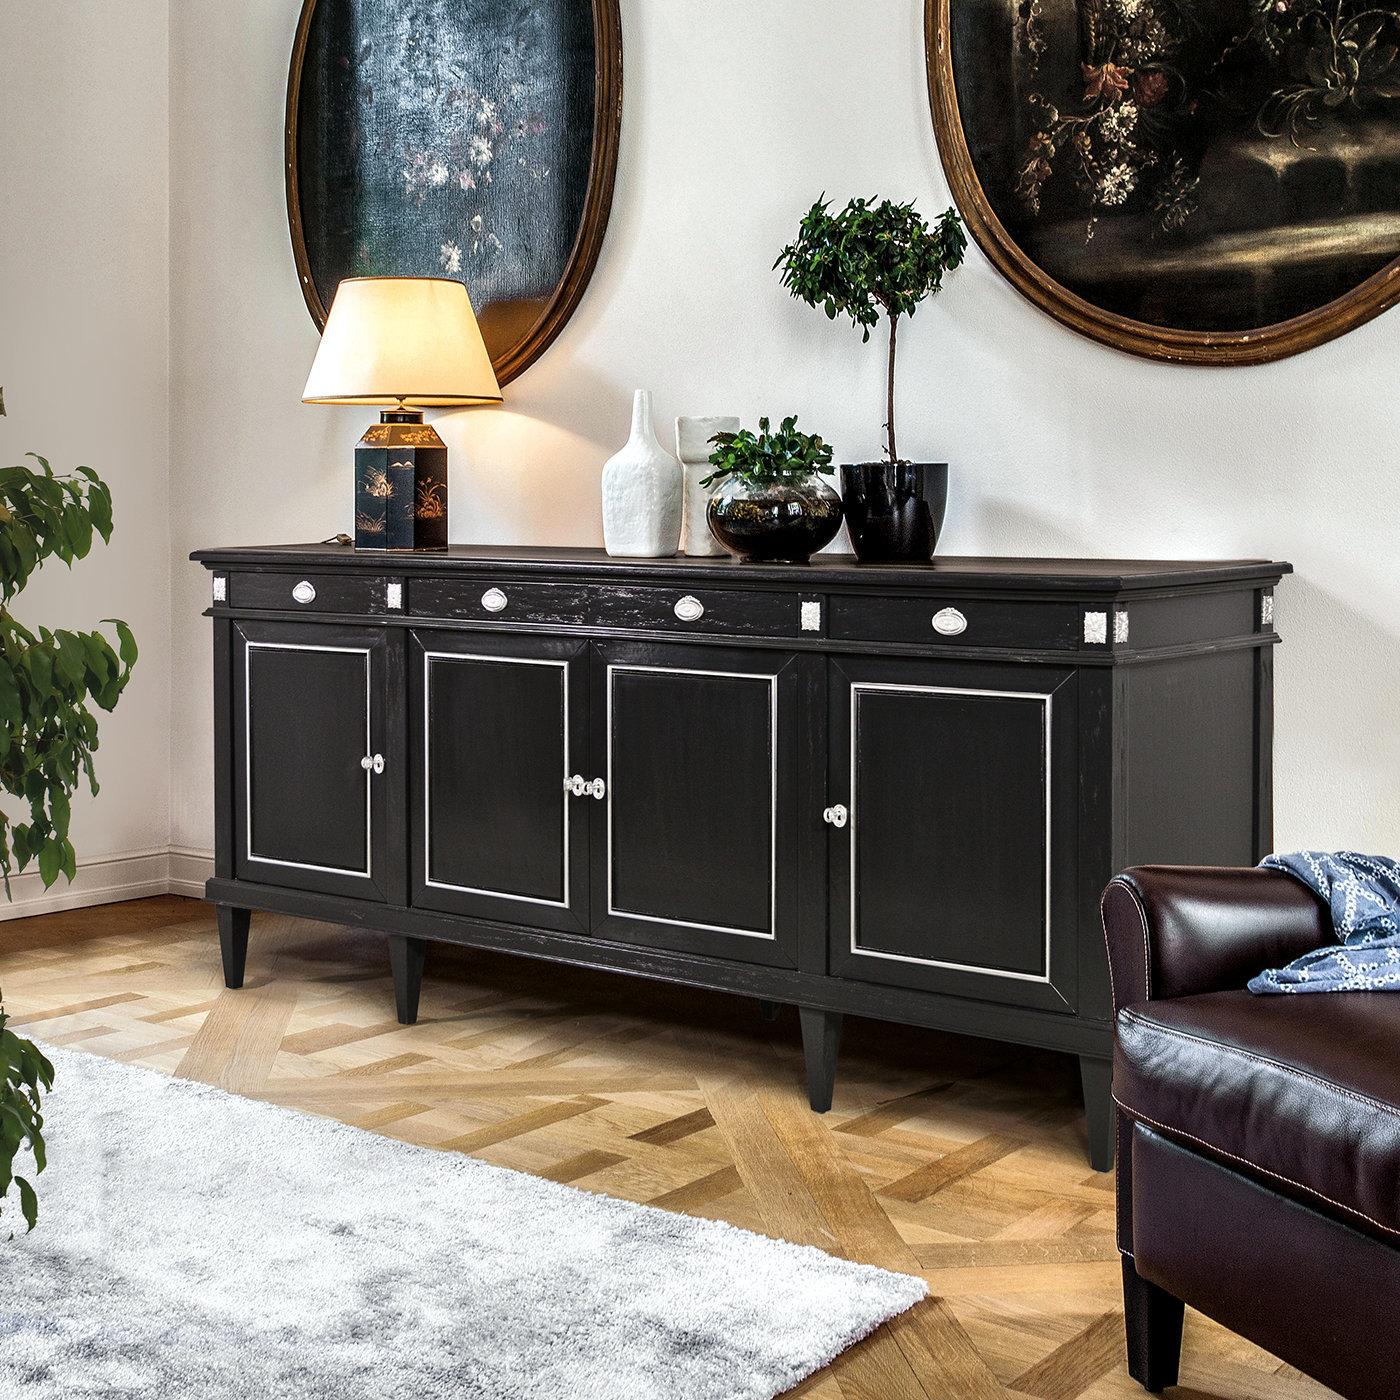 The exotic charm of colonial-style furniture is impeccably exemplified by this exquisite sideboard, its open-pore, oak-veneered MDF structure boasting a glossy black finish that is brightened up by details in antiqued silver leaf accenting the front